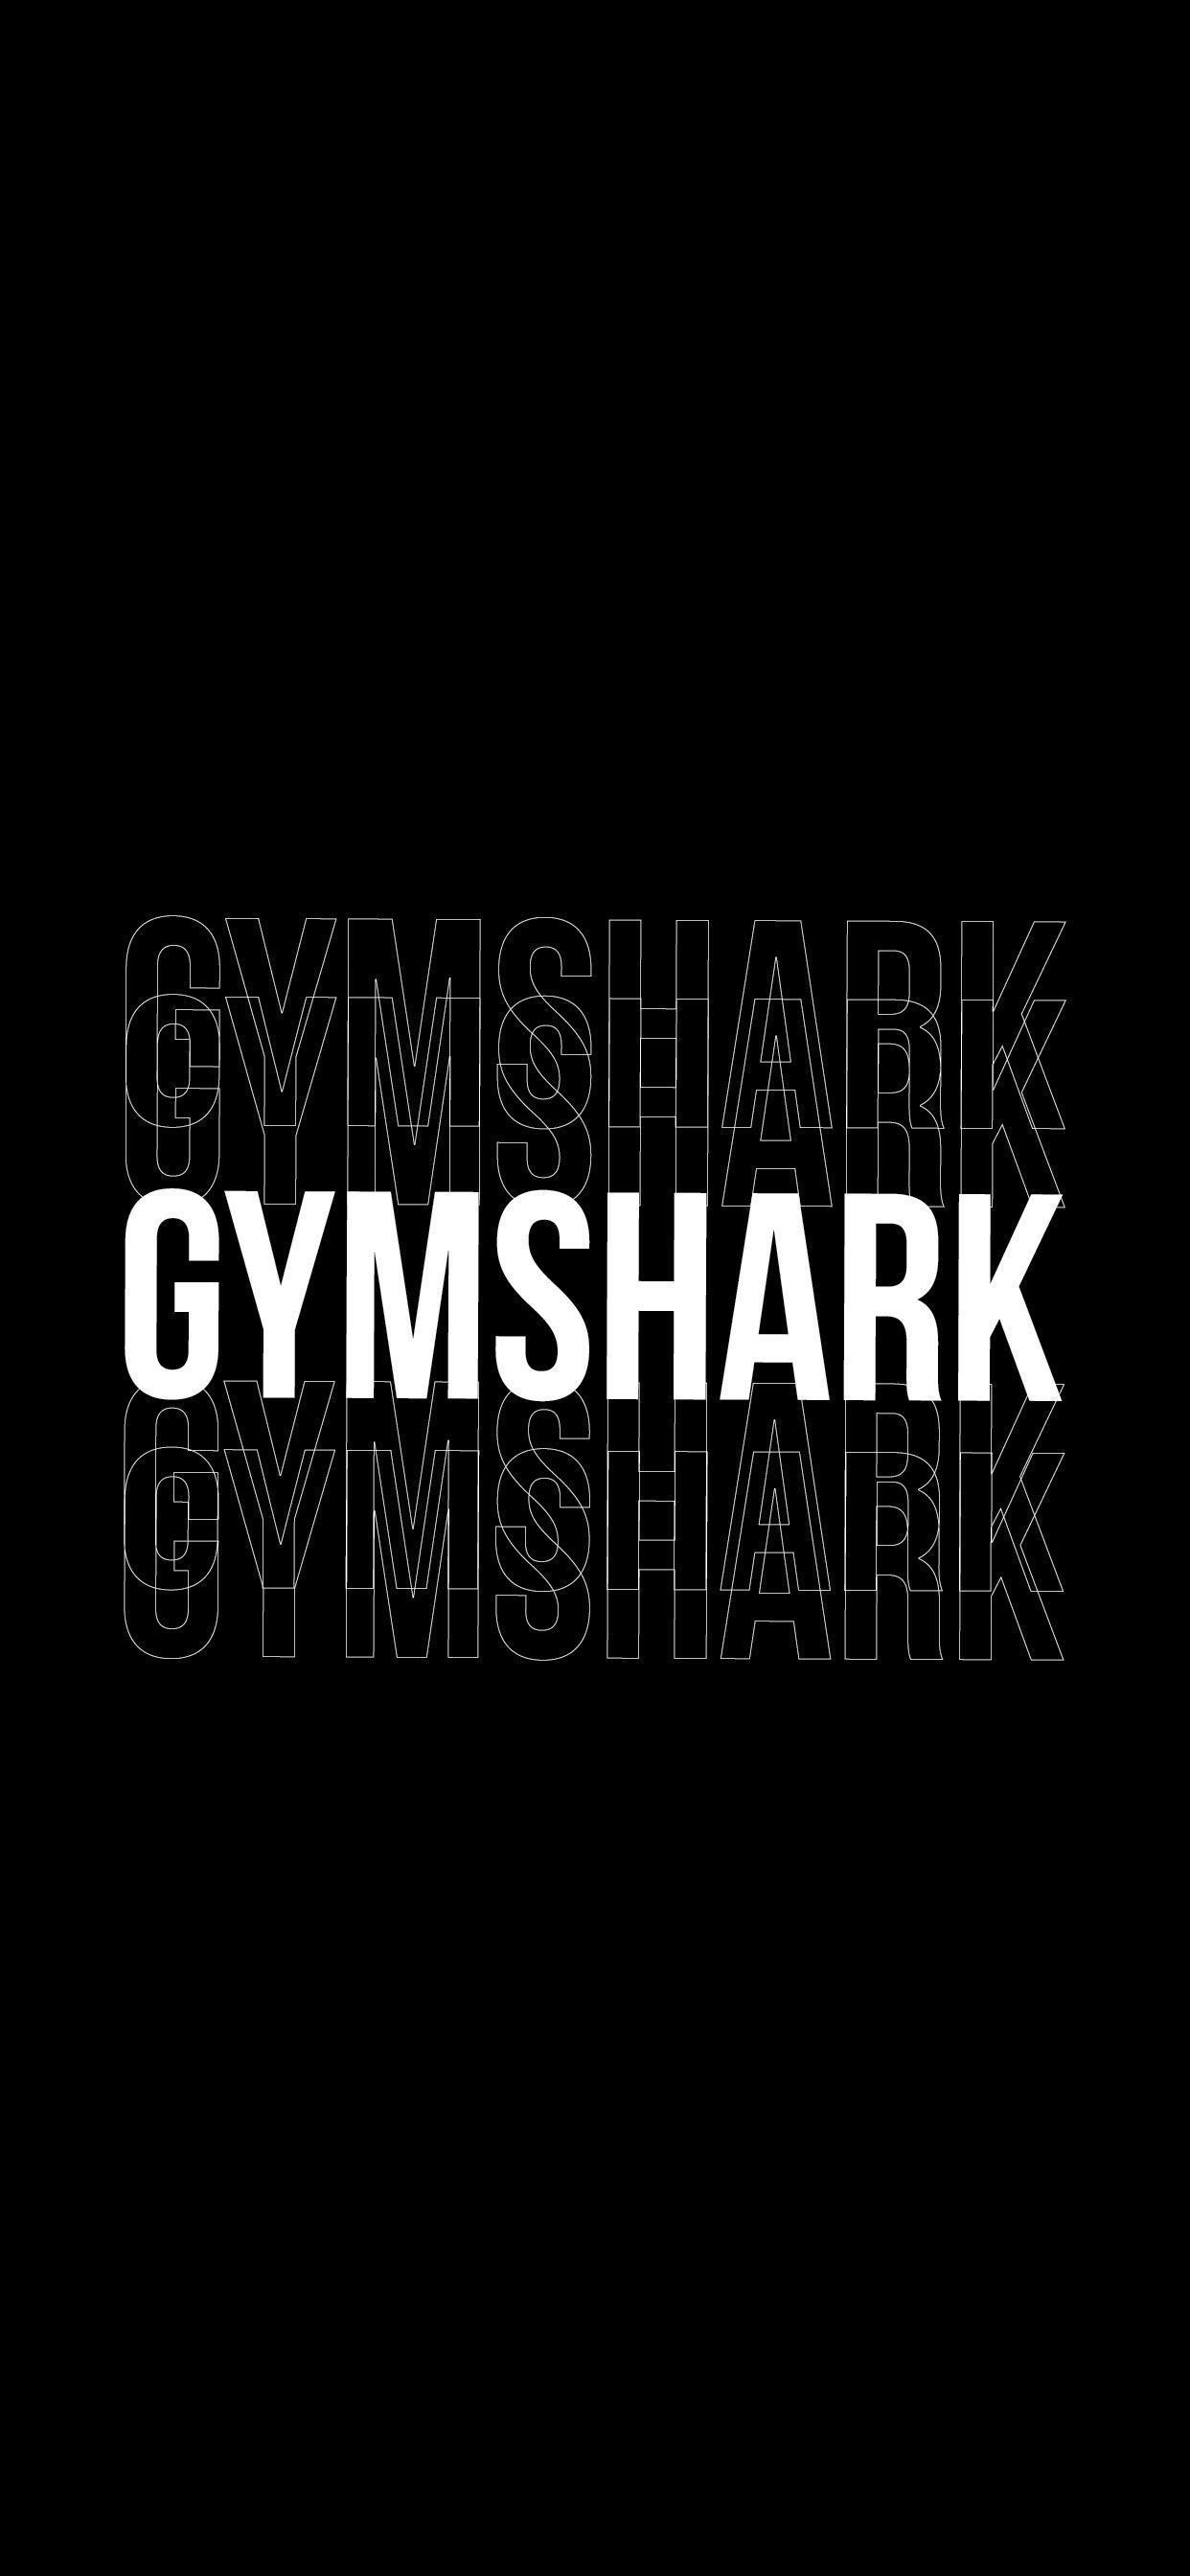 The Official Gymshark wallpaper. The Haze collection. #Gymshark